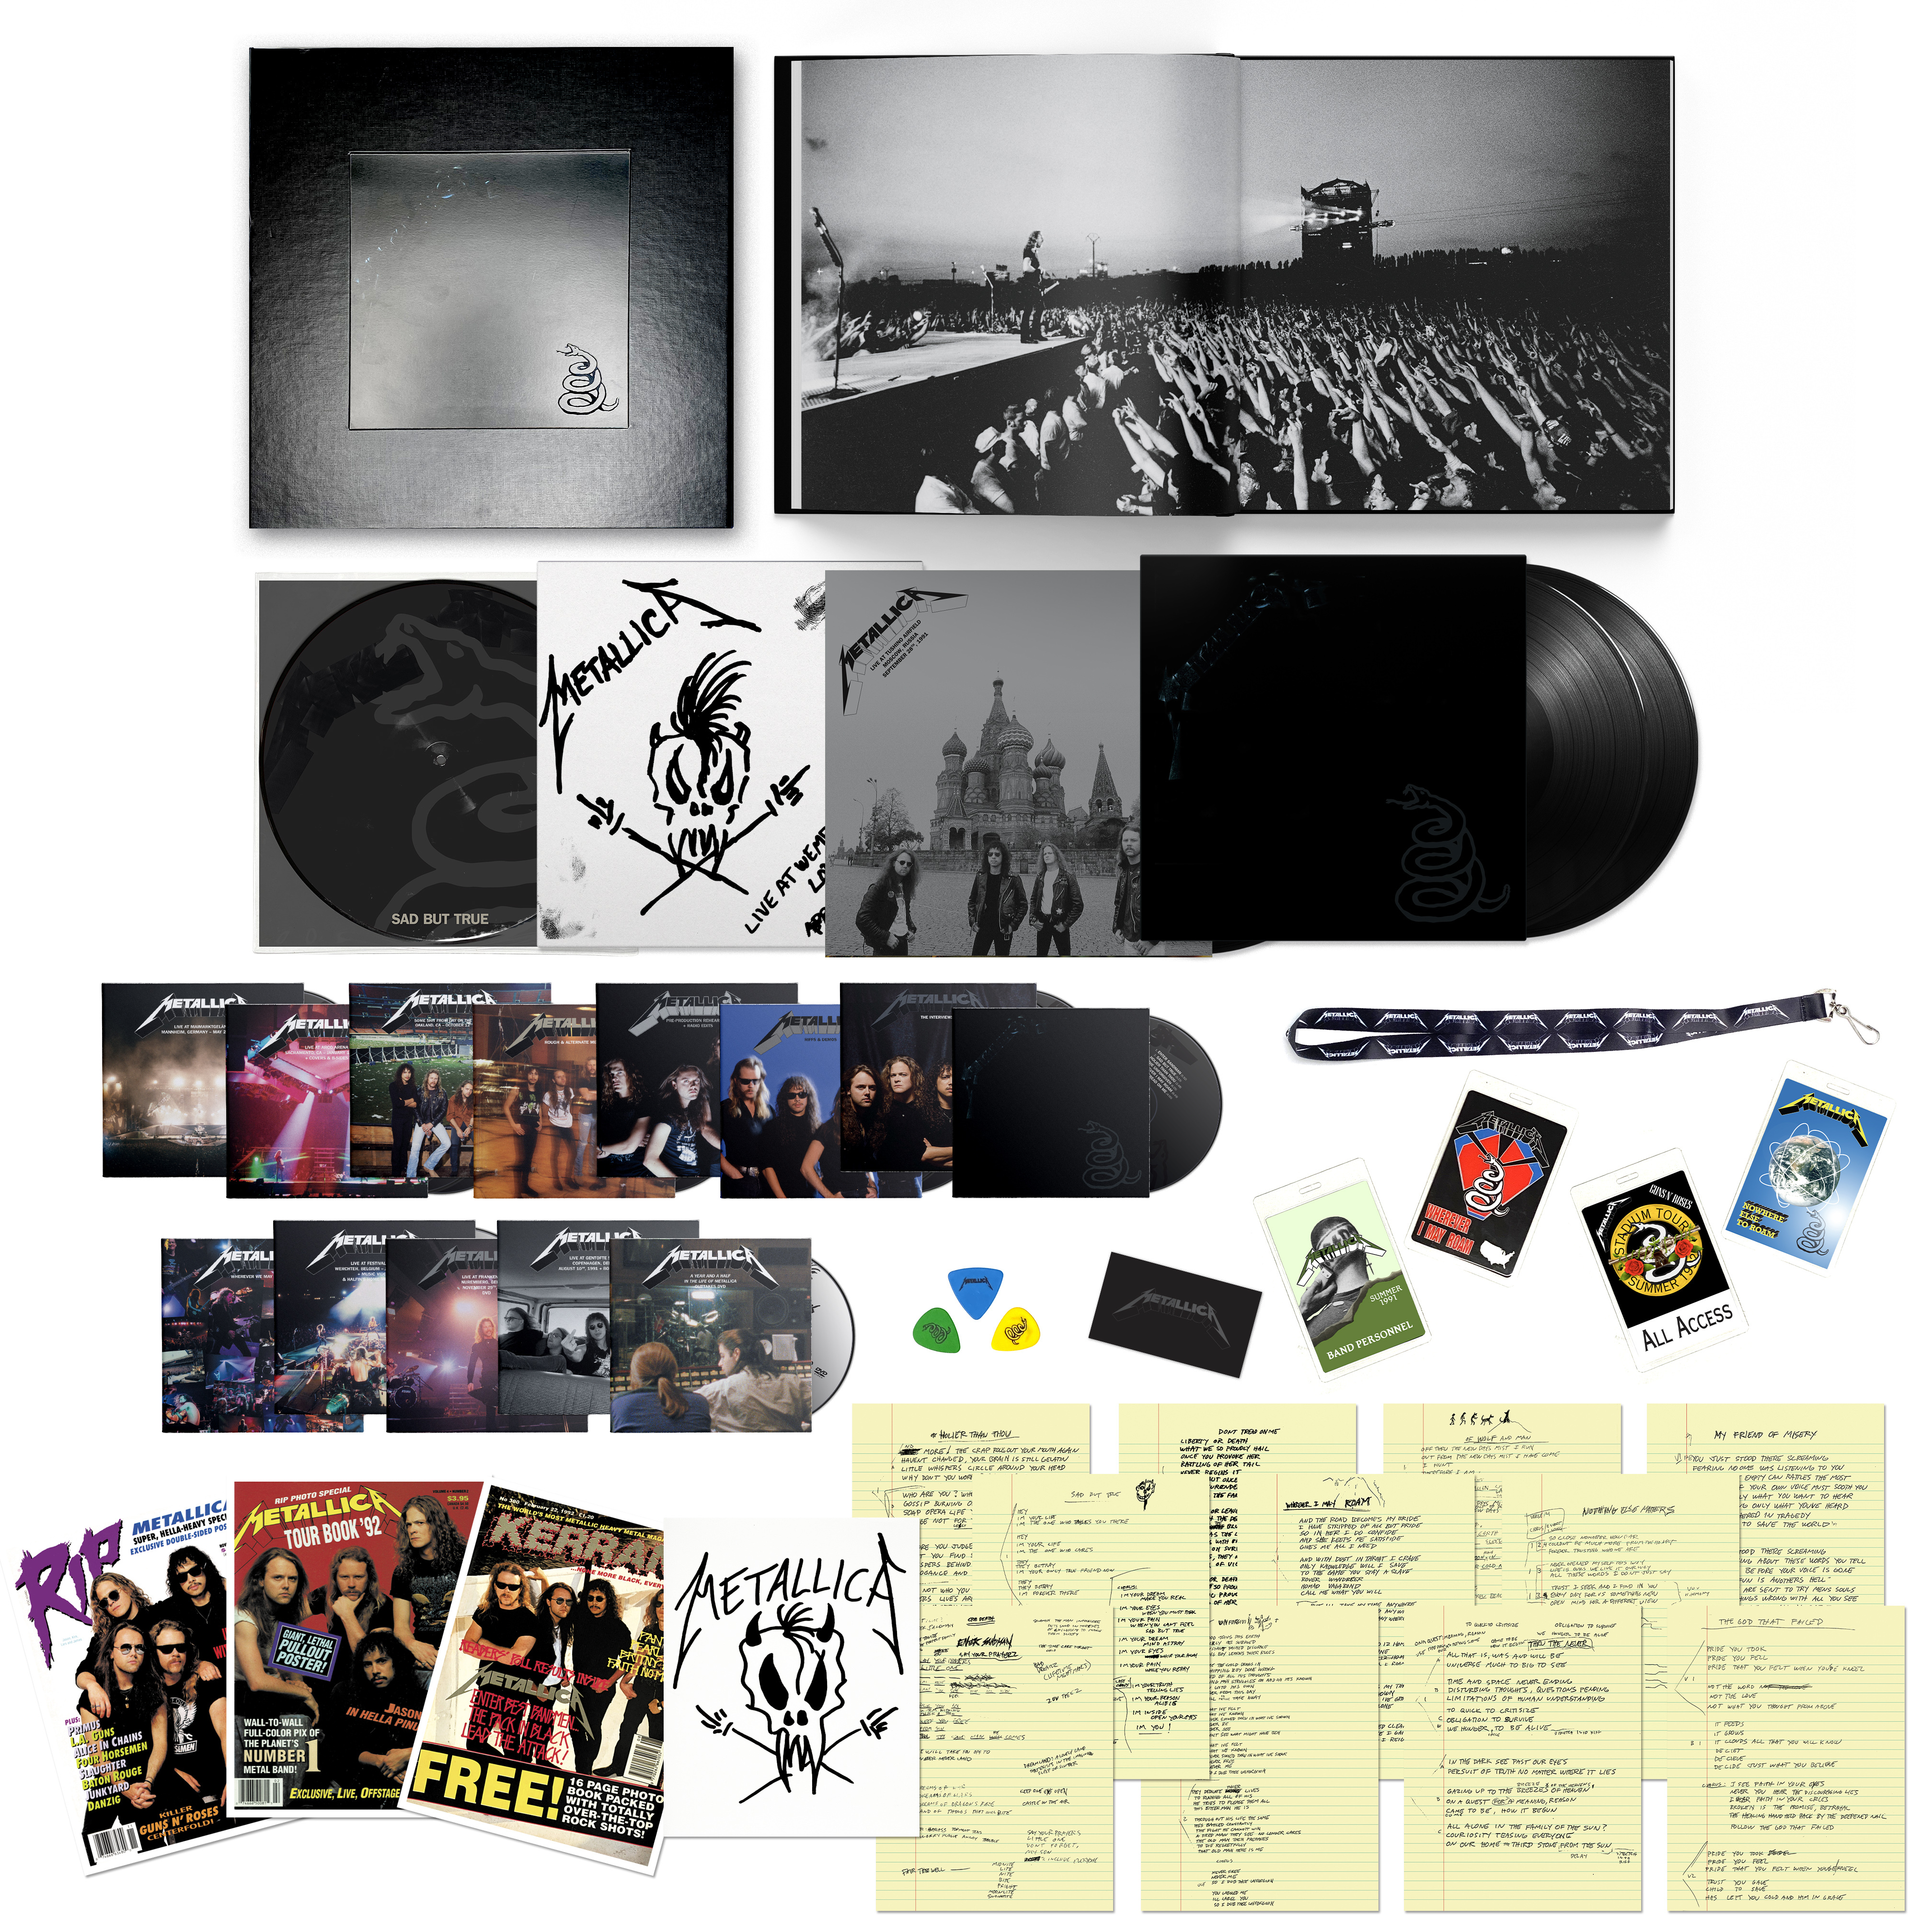 The Albums-Deluxe Set